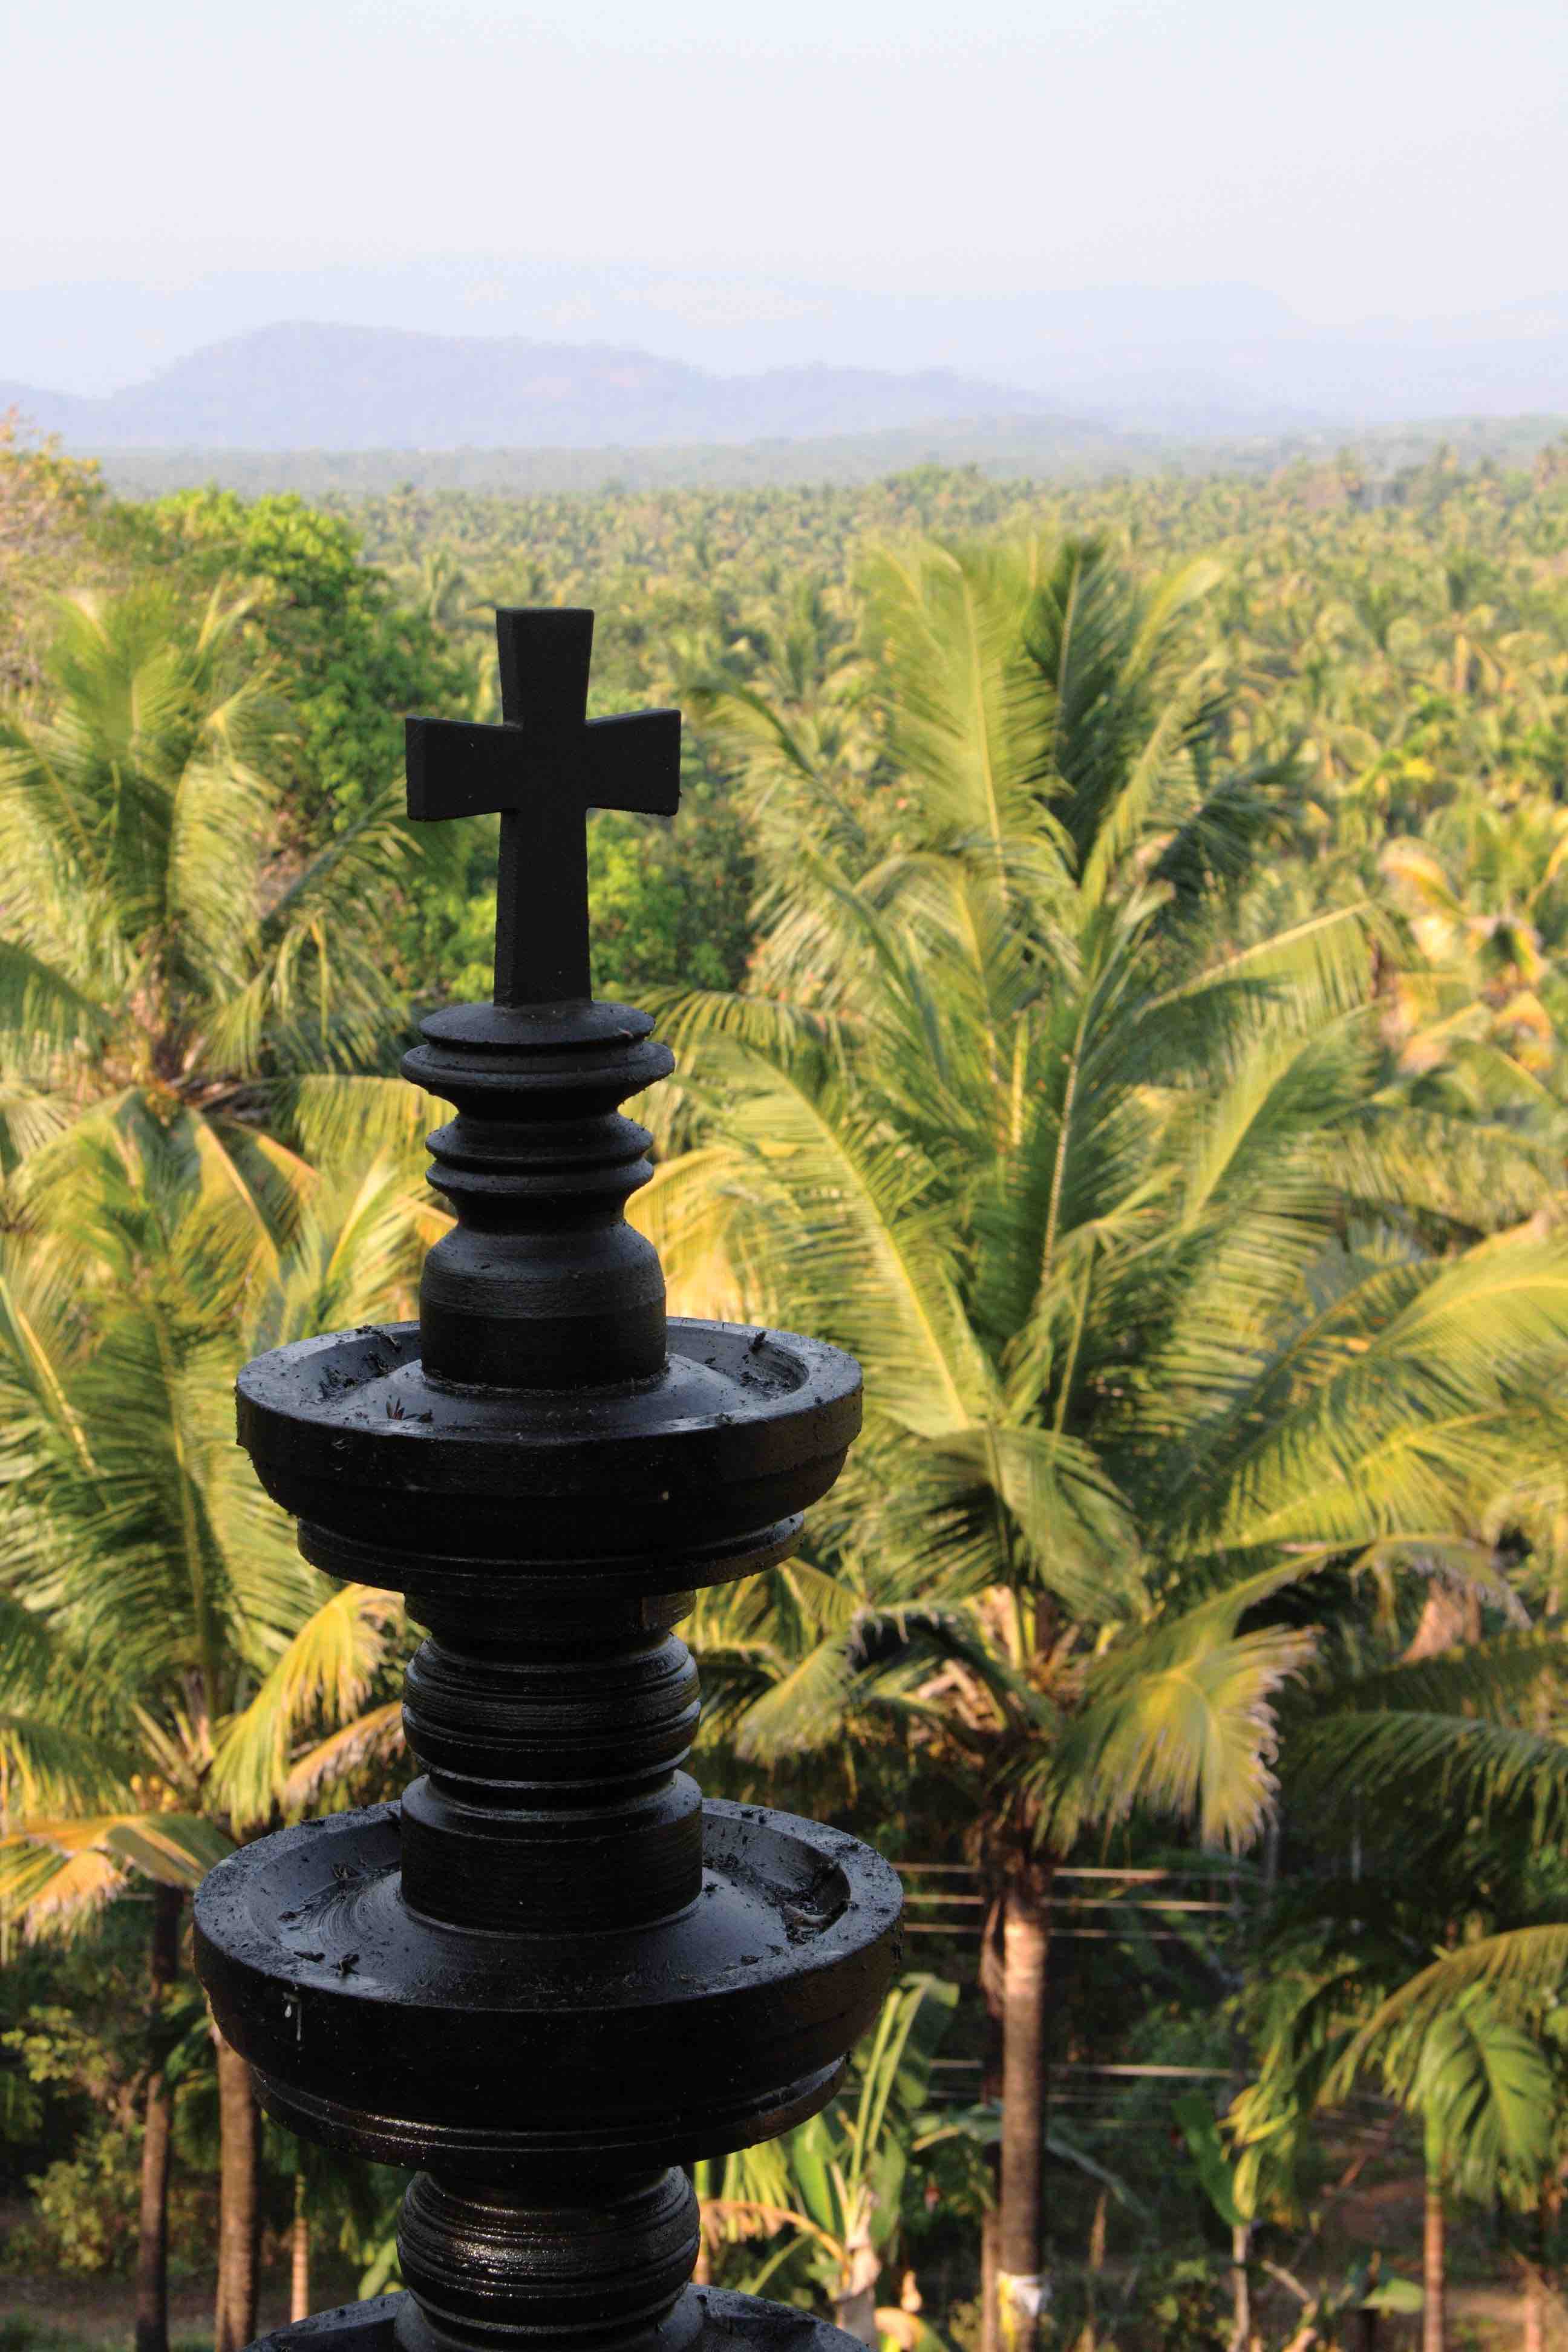 Traditional Indian stone oil lamp, topped with a cross, overlooks a coconut palm forest at the hill village of Pushpagiri